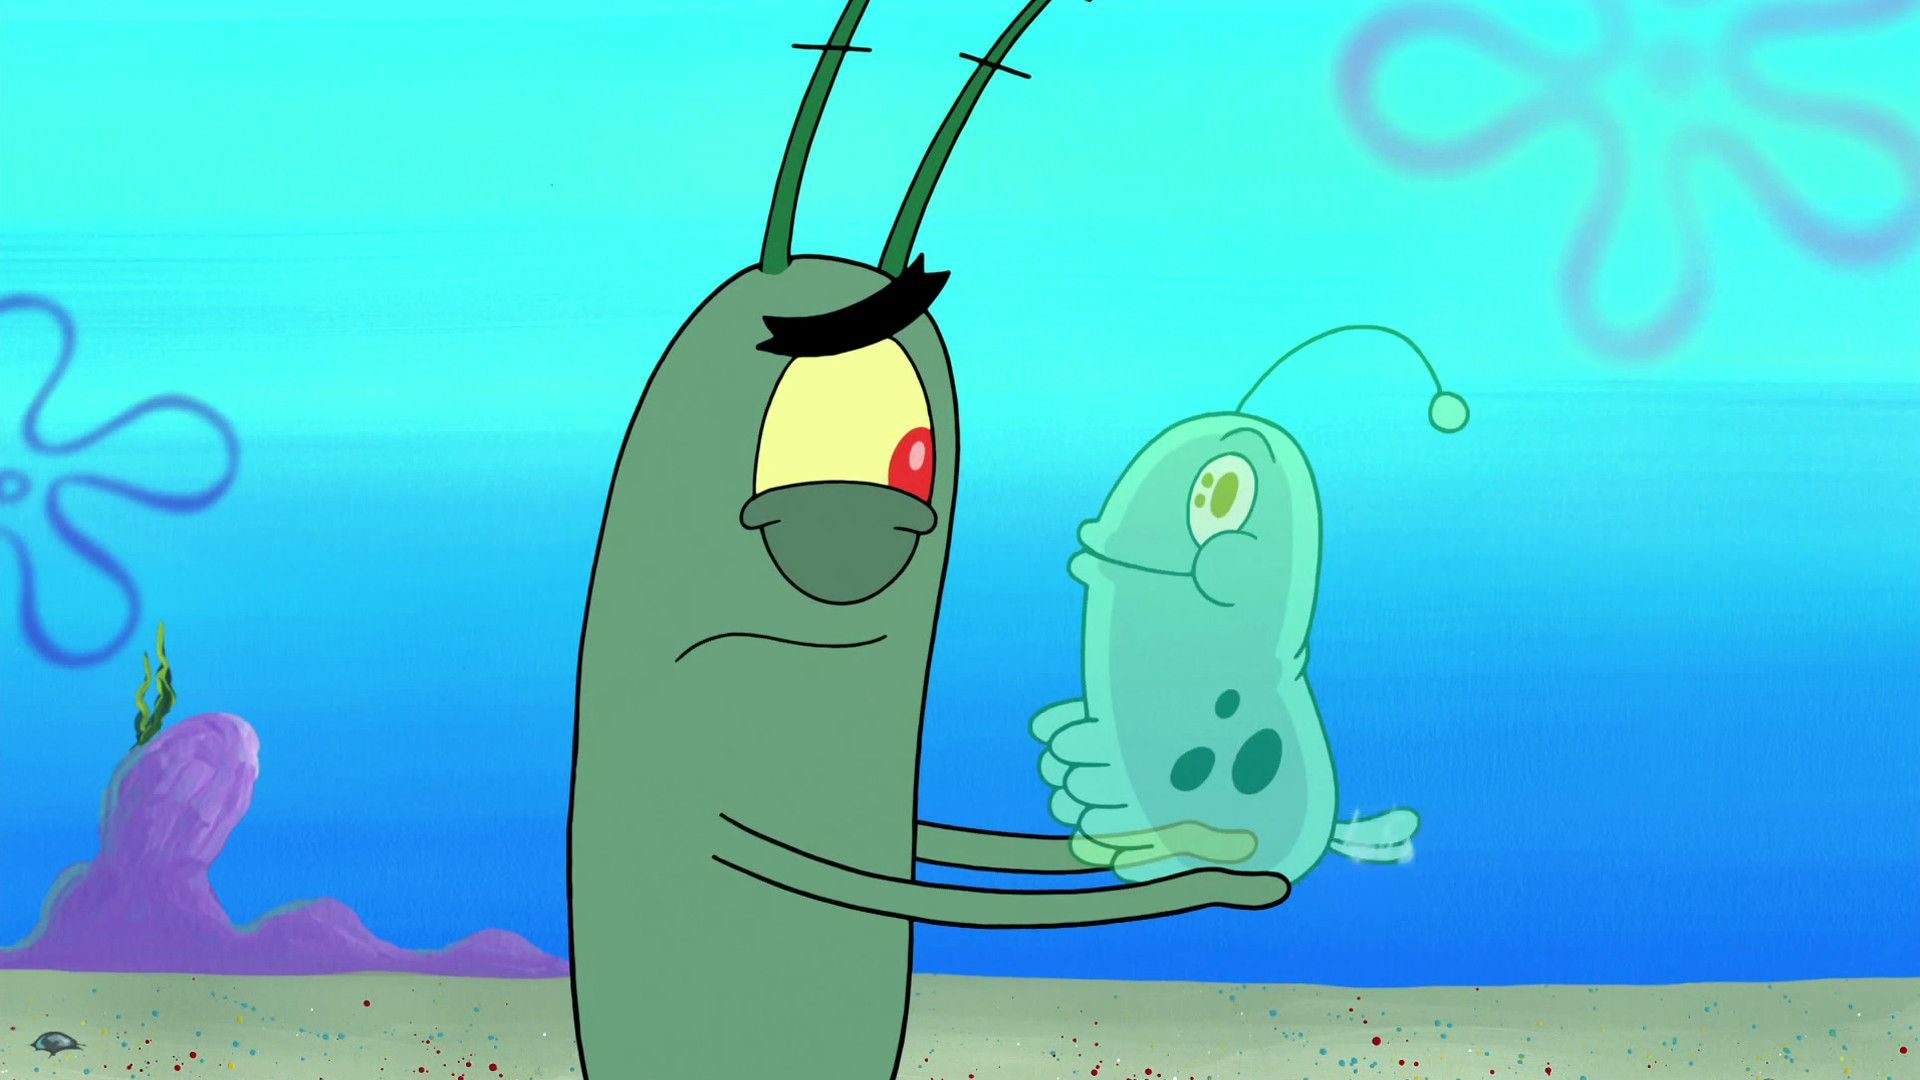 Plankton holding a baby squid - Squidward